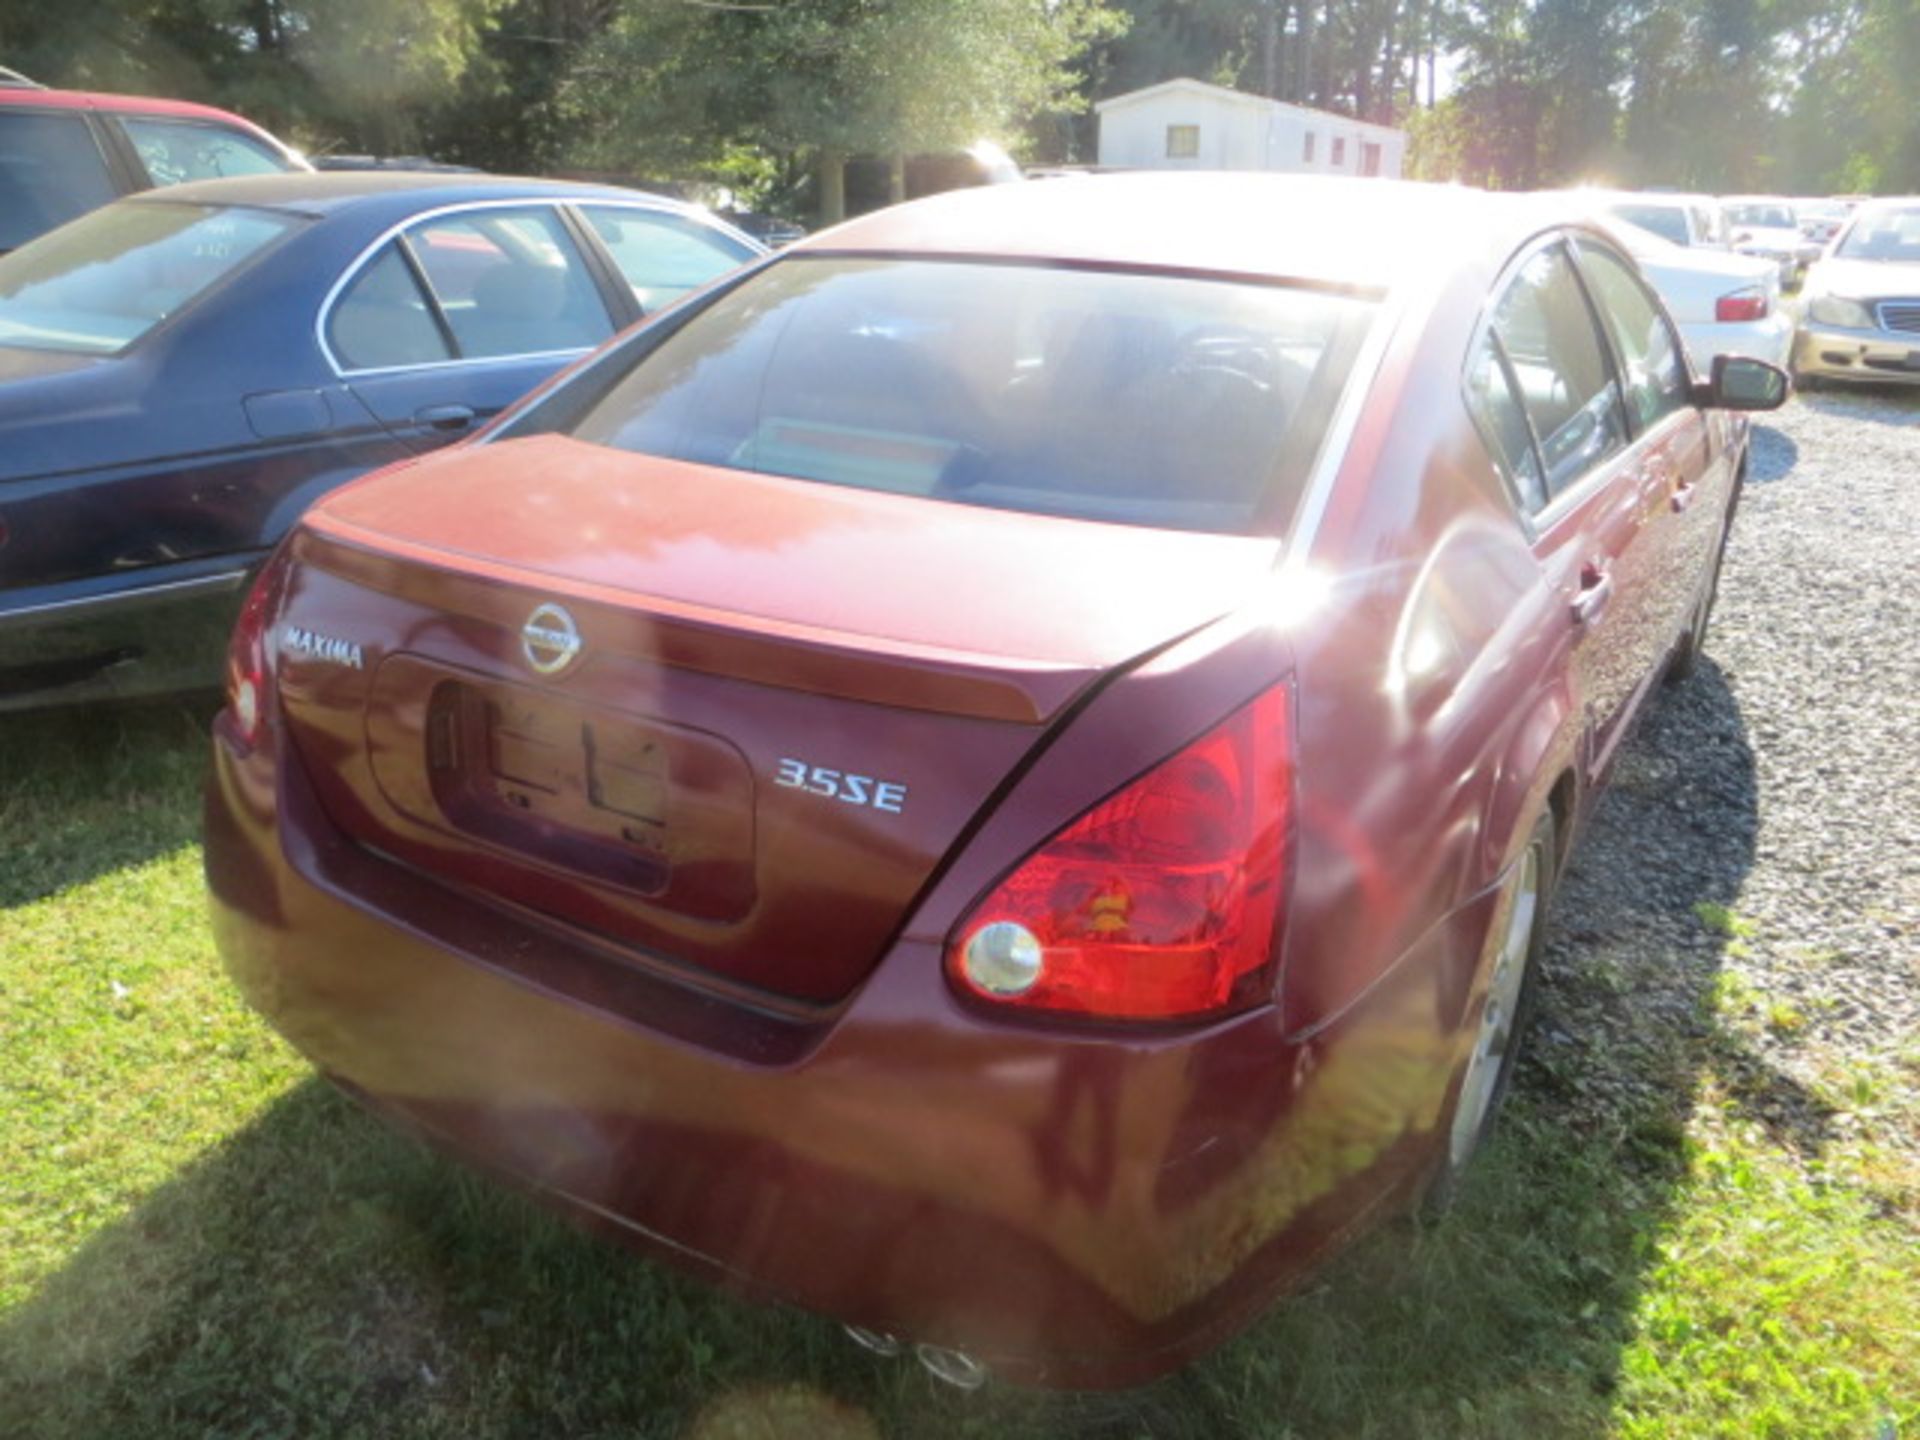 2004 Nissan Maxima 3.5SE-HOOD & ROOF NEED PAINTING 116000 MILES,VIN 1N4BA41E84C865431, VEHICLE BEING - Image 3 of 3